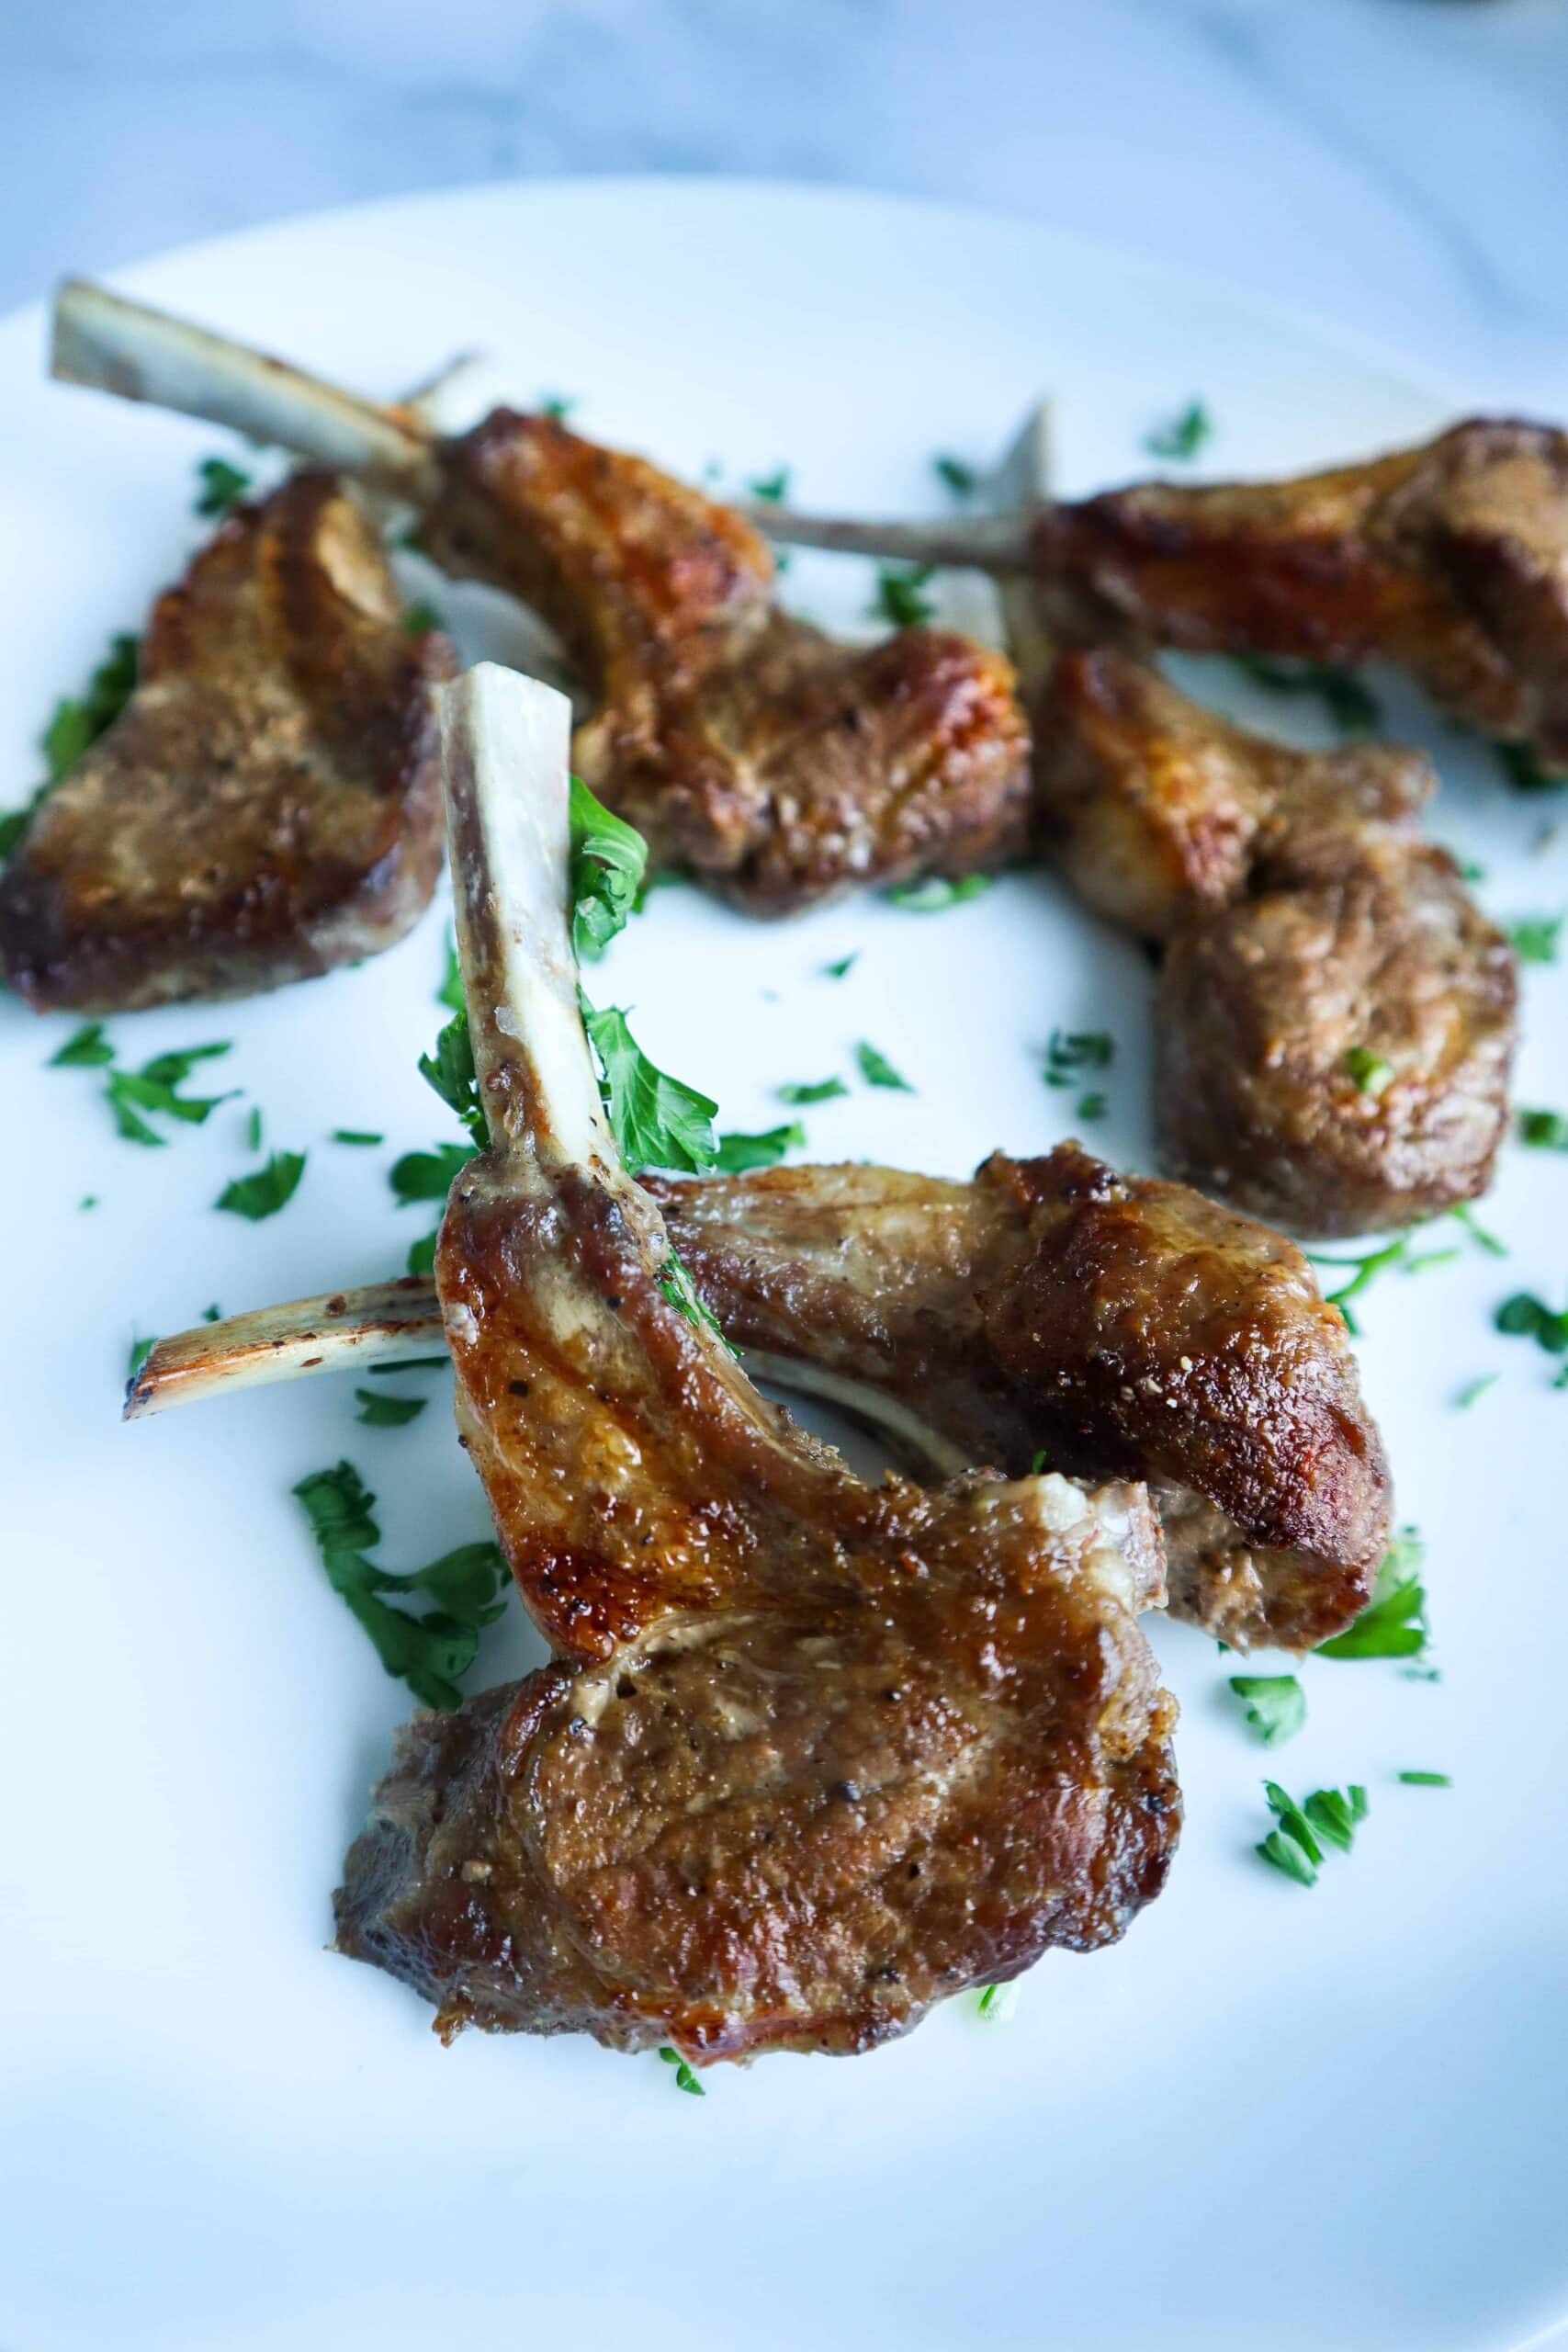 A plate of baked lamb chops with parsley as garnish